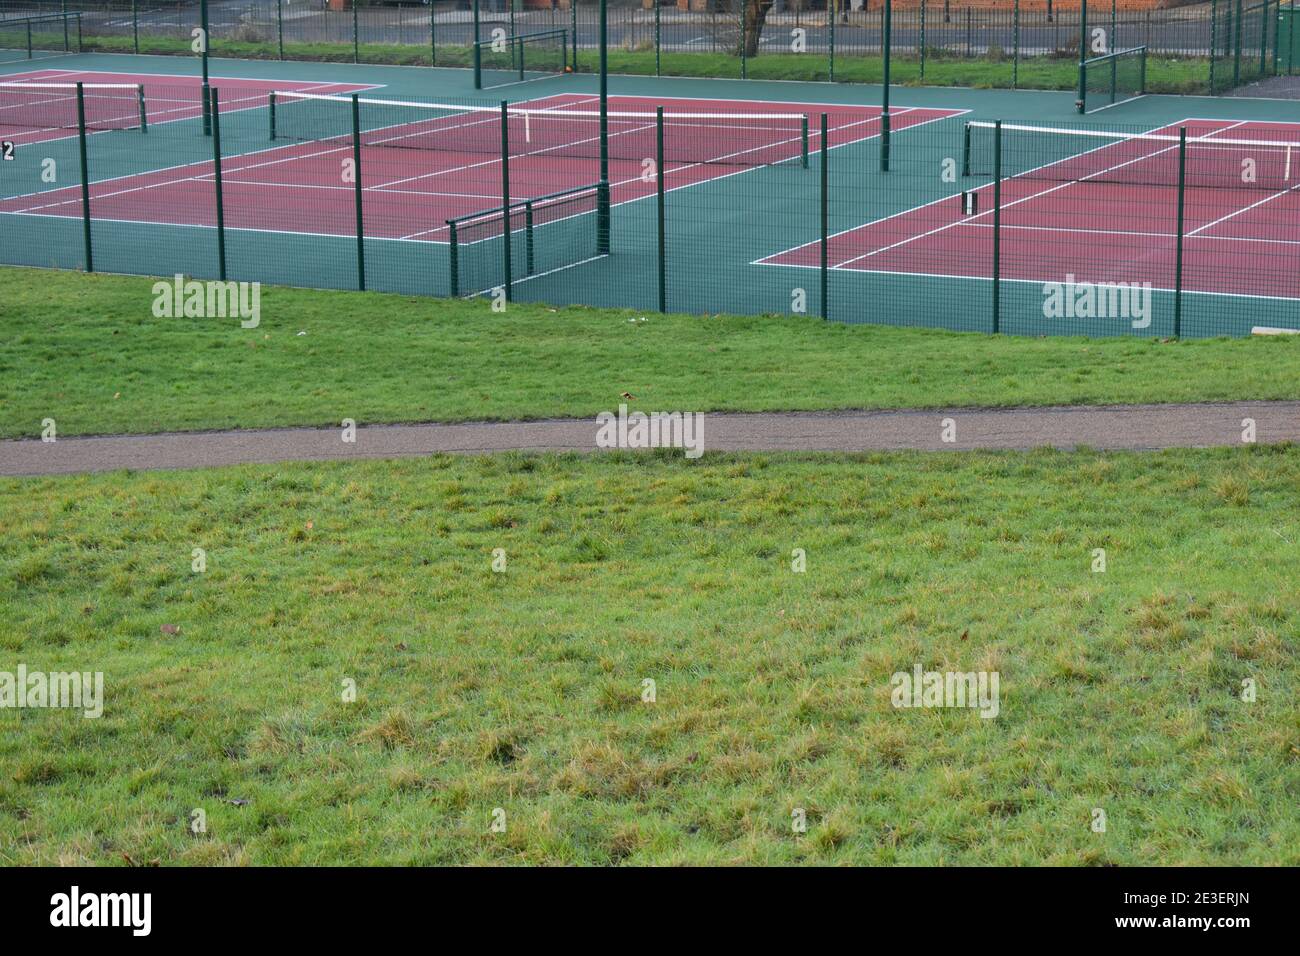 Outdoor hard tennis court which allows players to perform faster than clay but not as fast as grass Australian and US opens are played on this surface Stock Photo